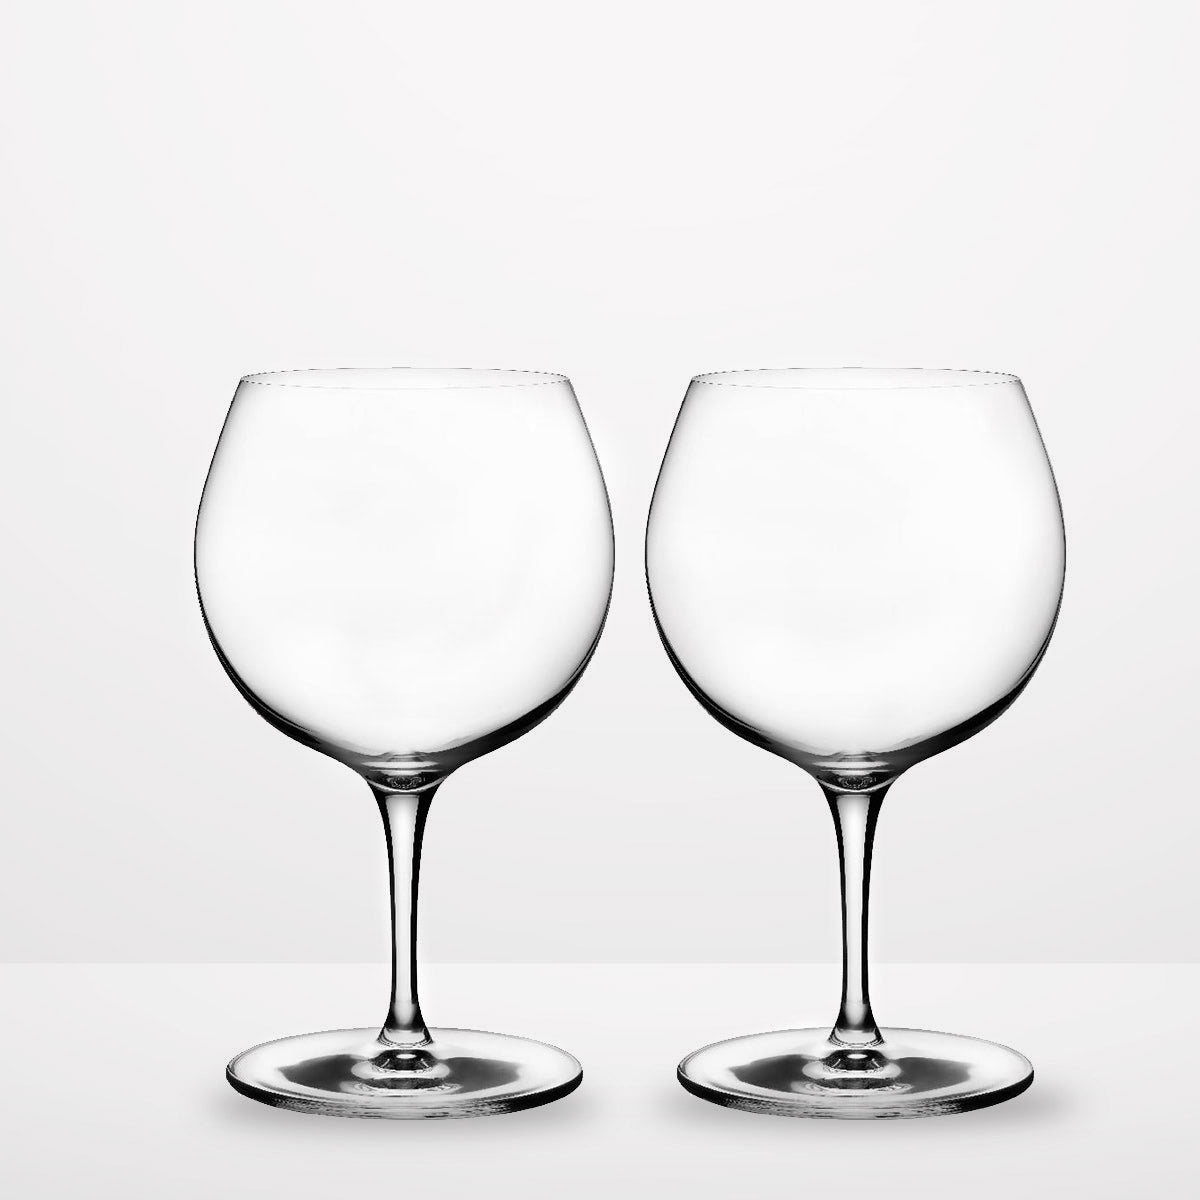 Nude Vintage Gin and Tonic Glasses Set of 2